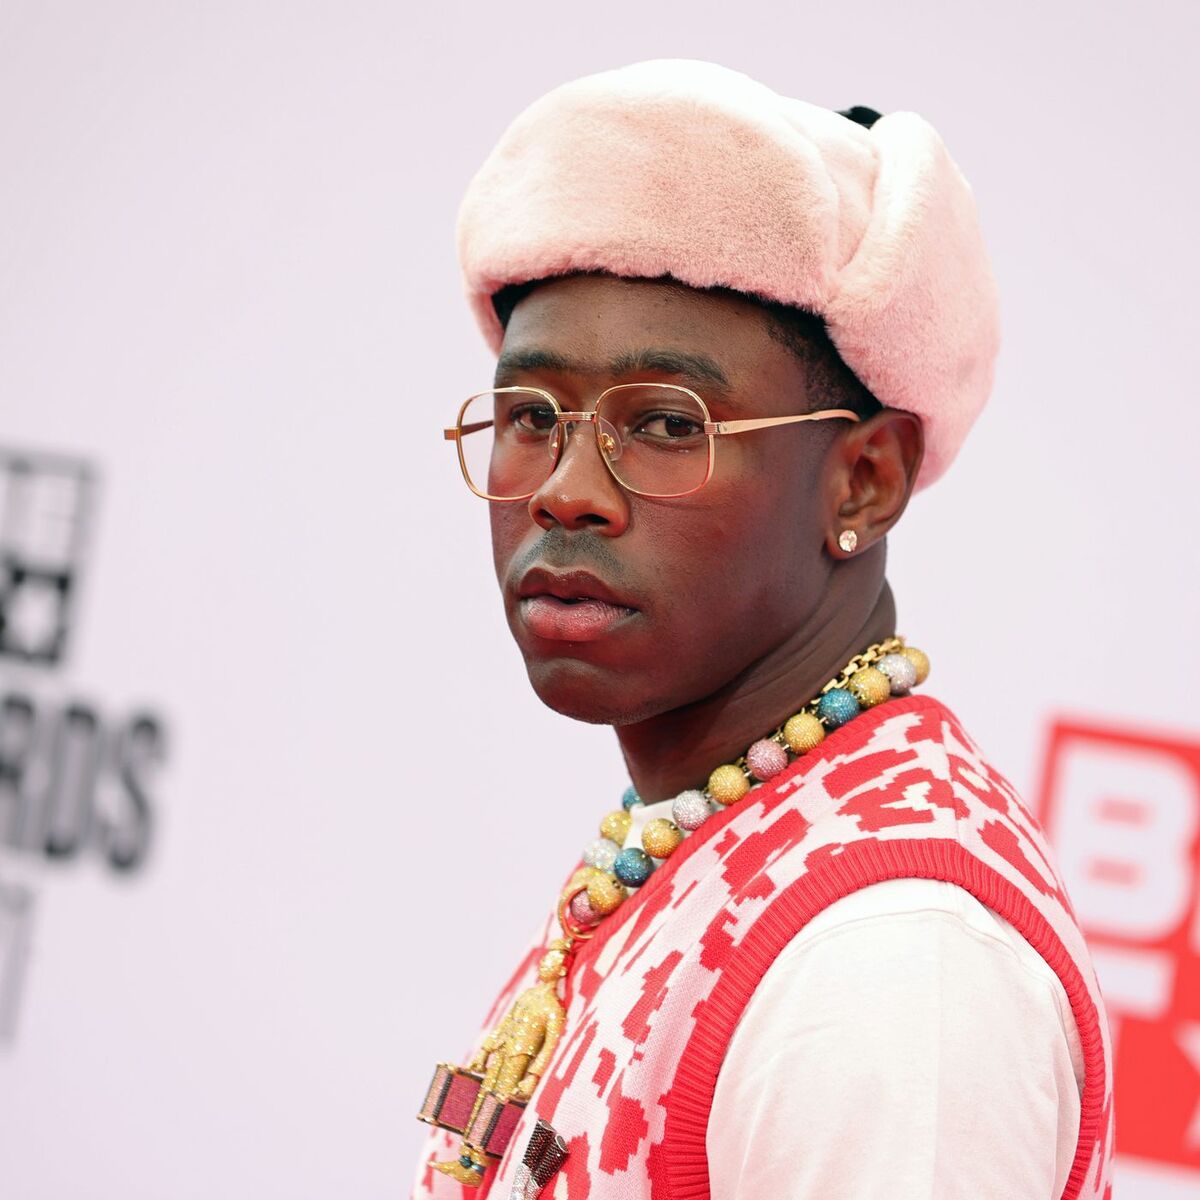 Watch the first episode of Tyler The Creator's TV Show “Nuts